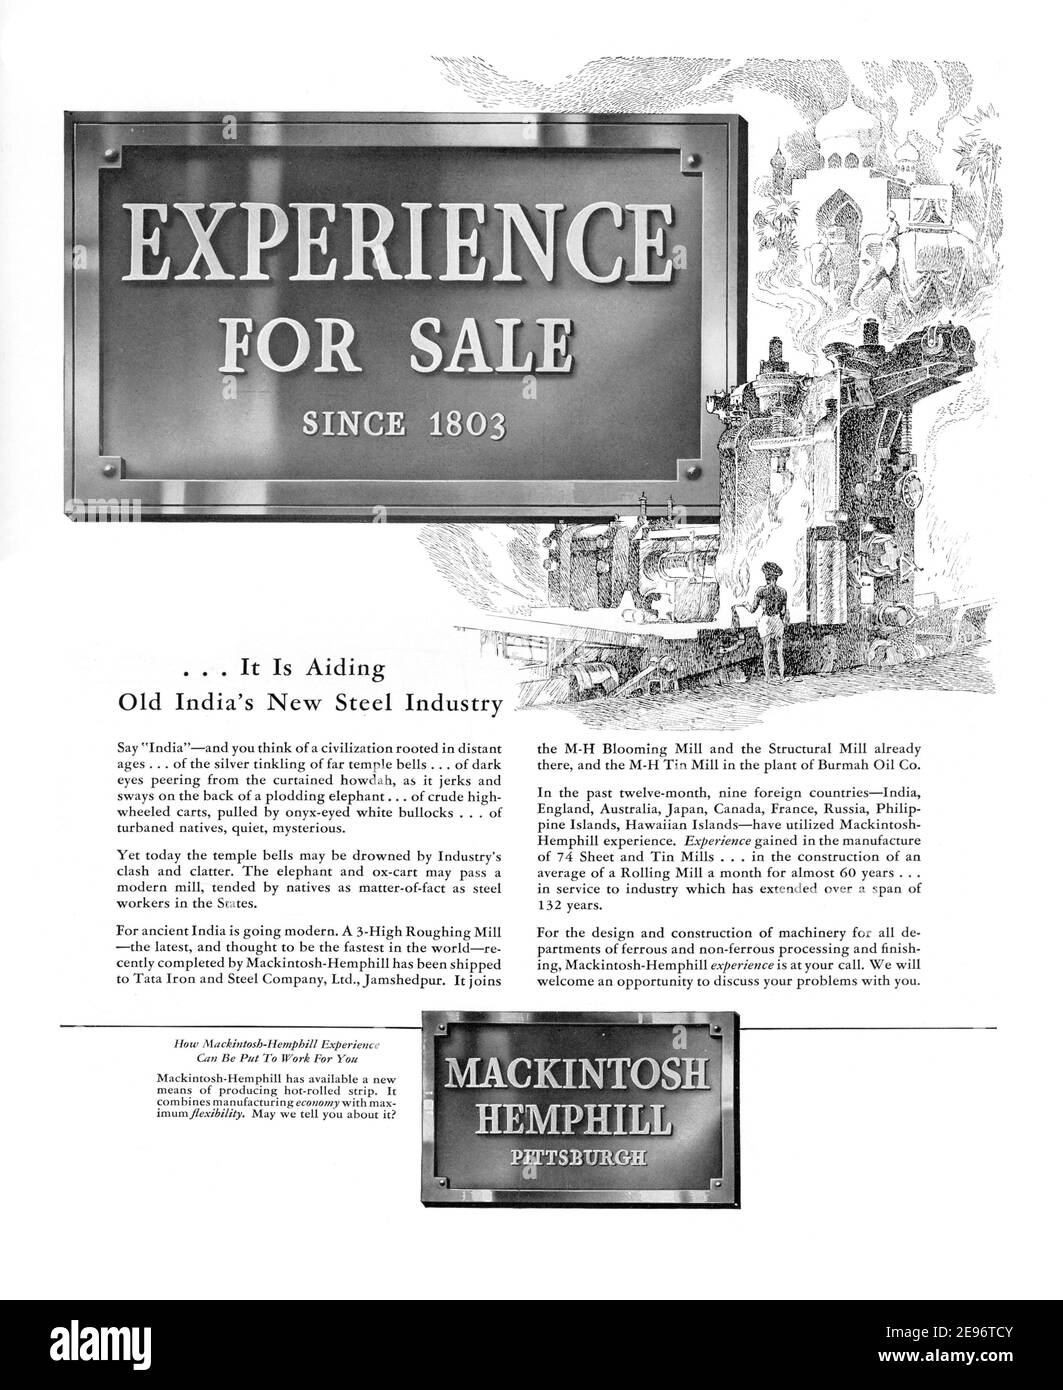 1935 Mackintosh Hemphill 'Experience For Sale' Advertisement, retouched and revived, A3+, 600dpi Stock Photo